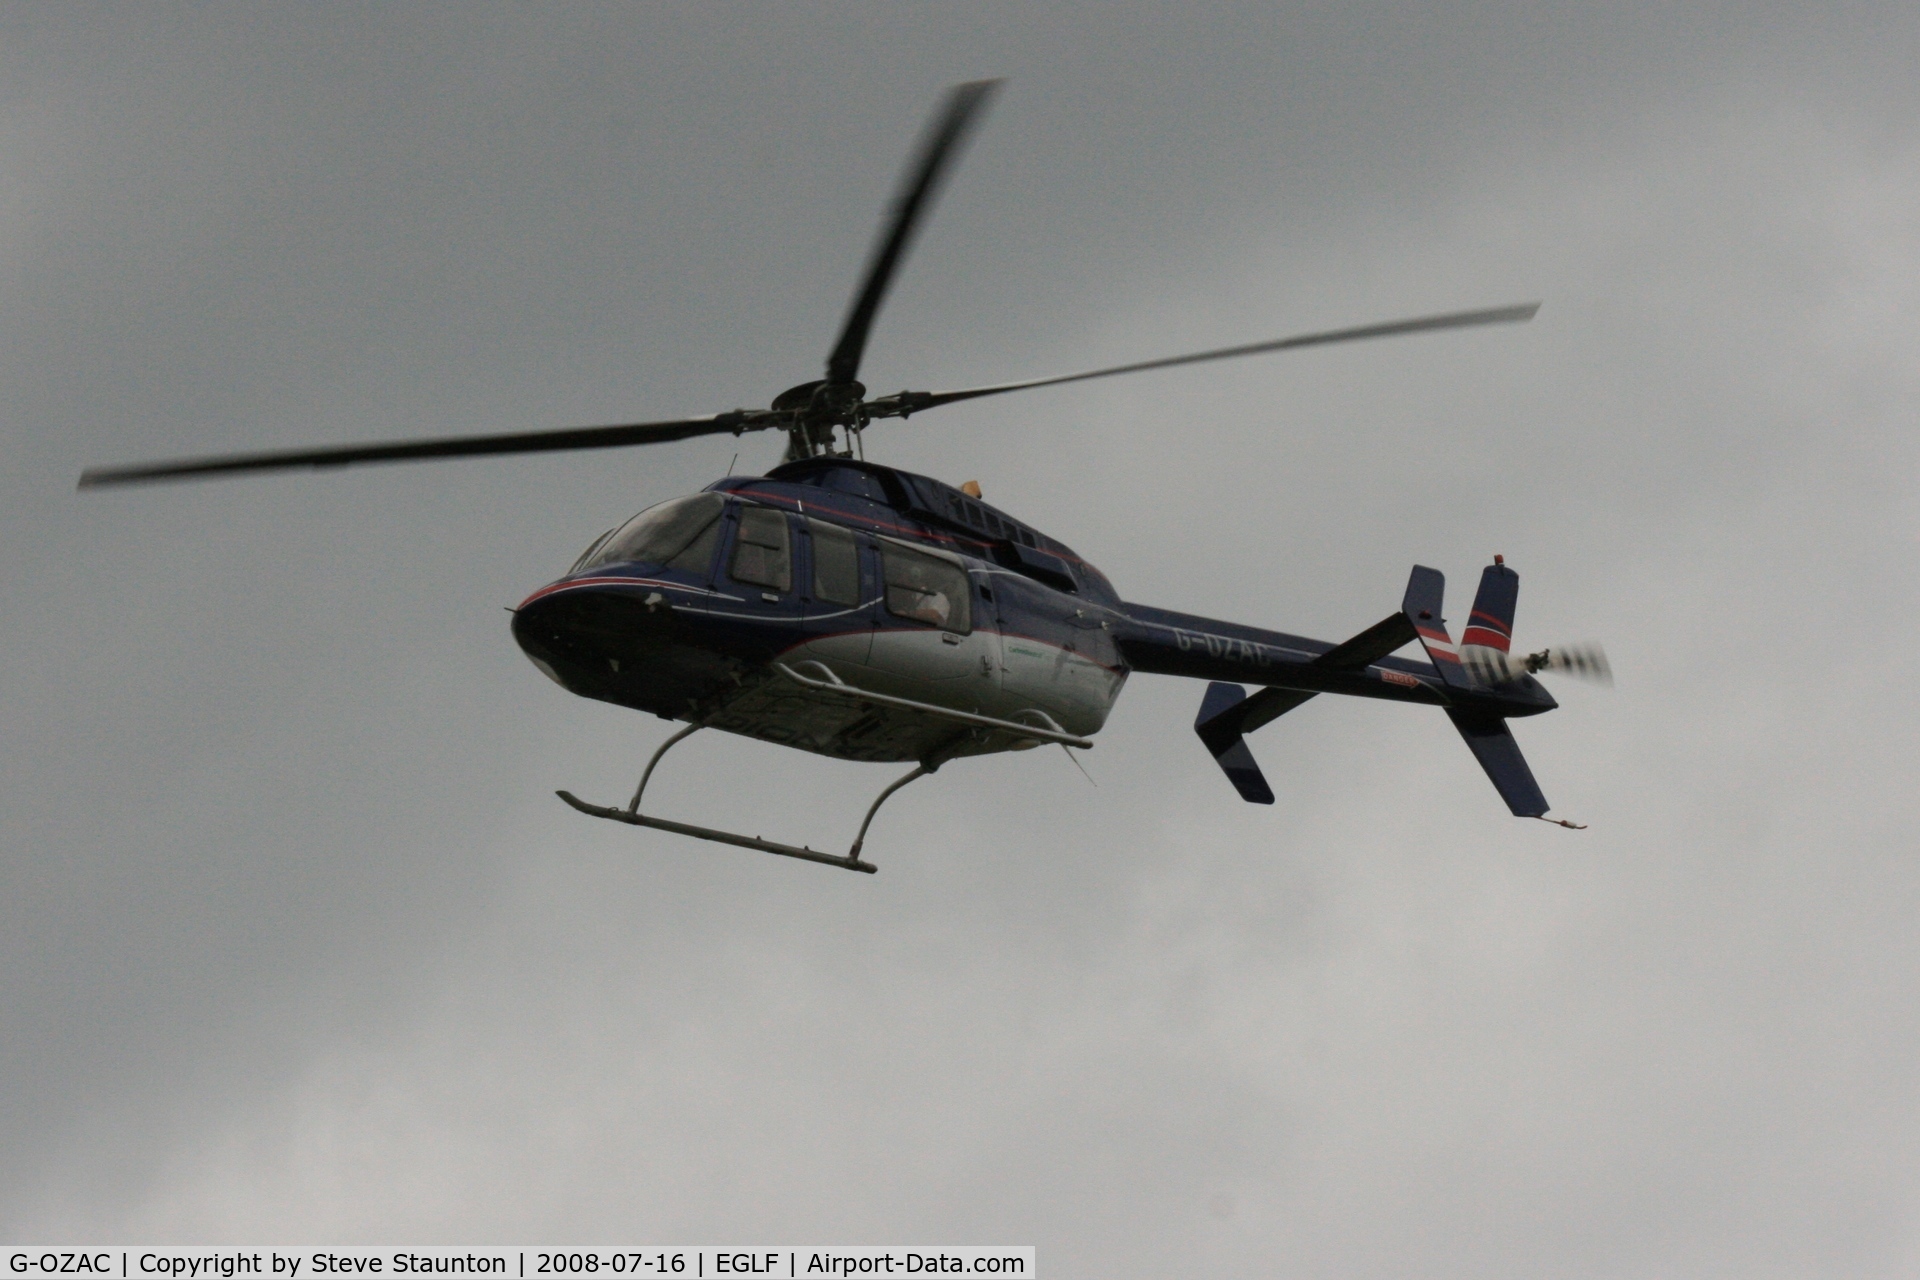 G-OZAC, 1996 Bell 407 C/N 53062, Taken at Farnborough Airshow on the Wednesday trade day, 16th July 2009